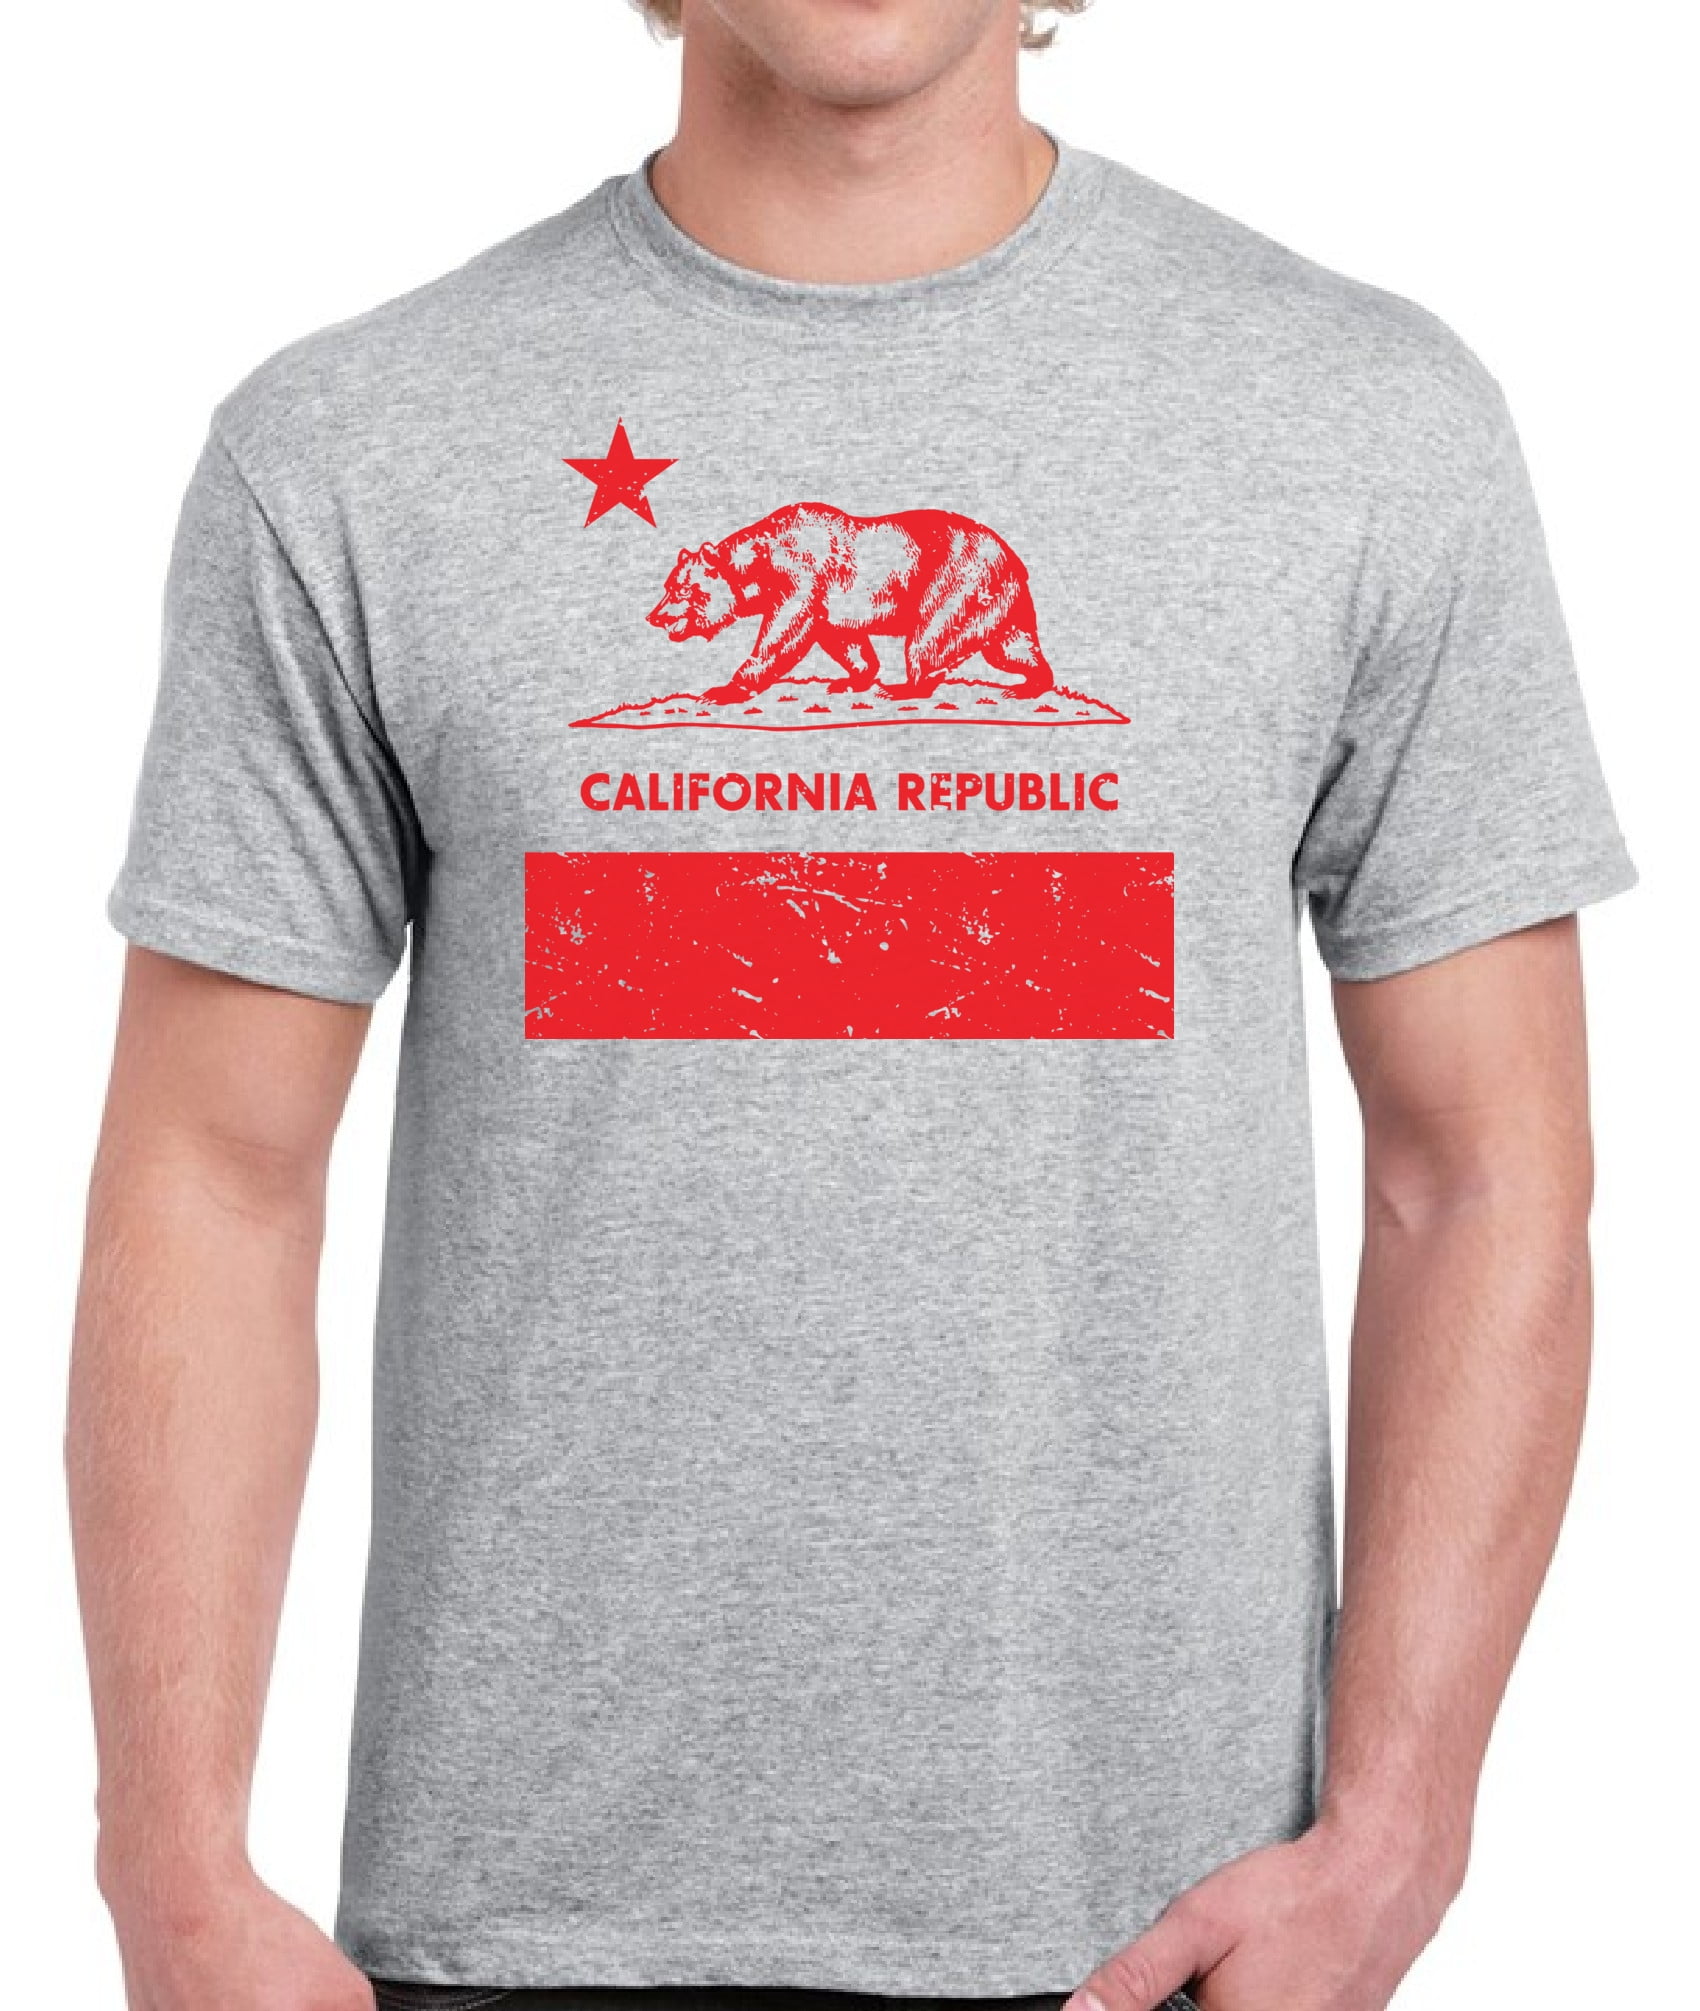 Red California Republic T-Shirt for Men - S M L XL 2XL 3XL 4XL USA State Graphic Tee - California Collection Funny Cali Gift for - Walmart.com